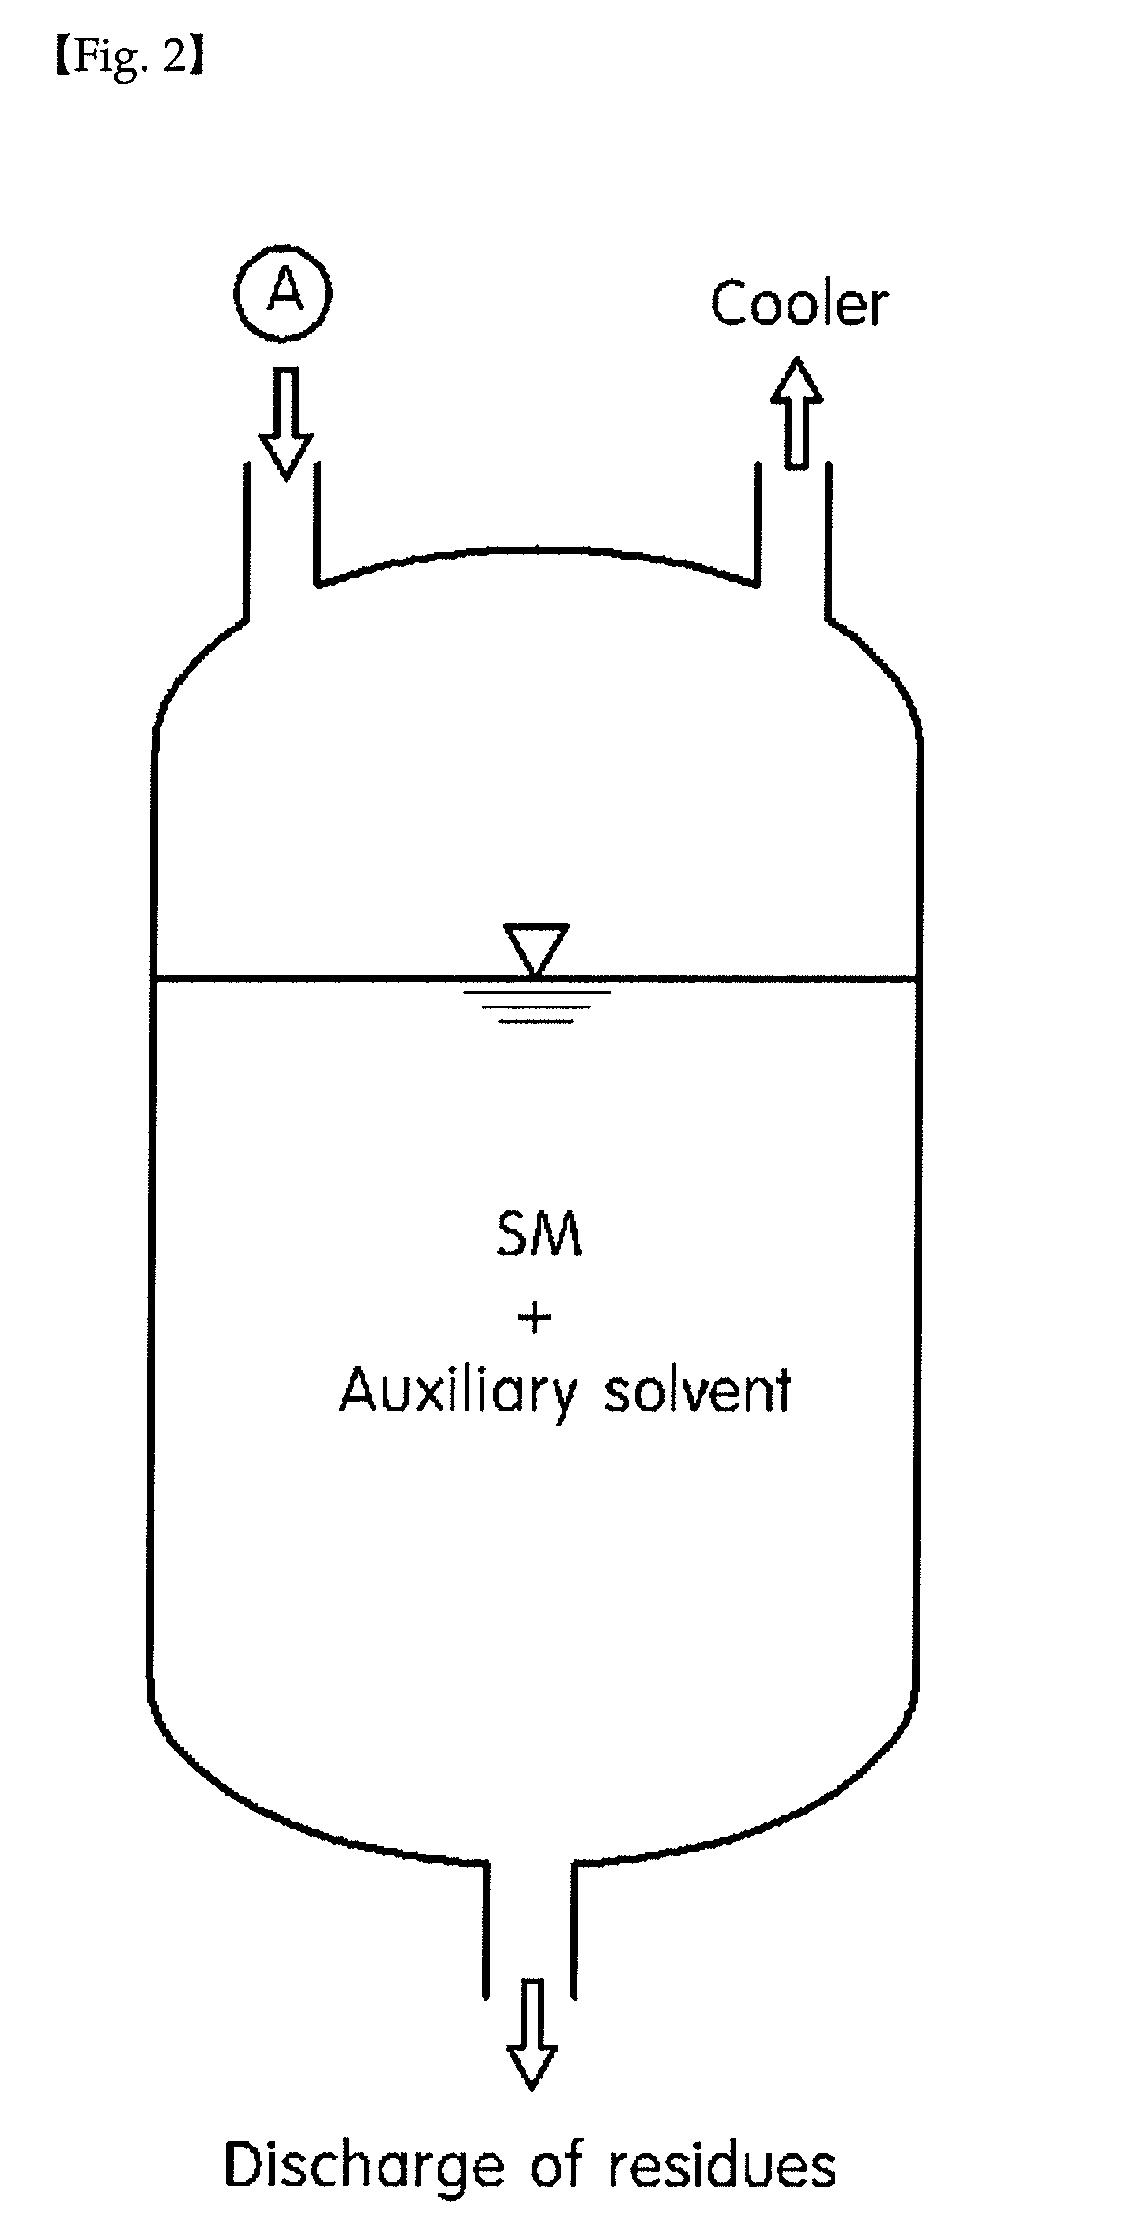 Apparatus for recovering styrene monomer and method of recovering styrene monomer using auxiliary solvent